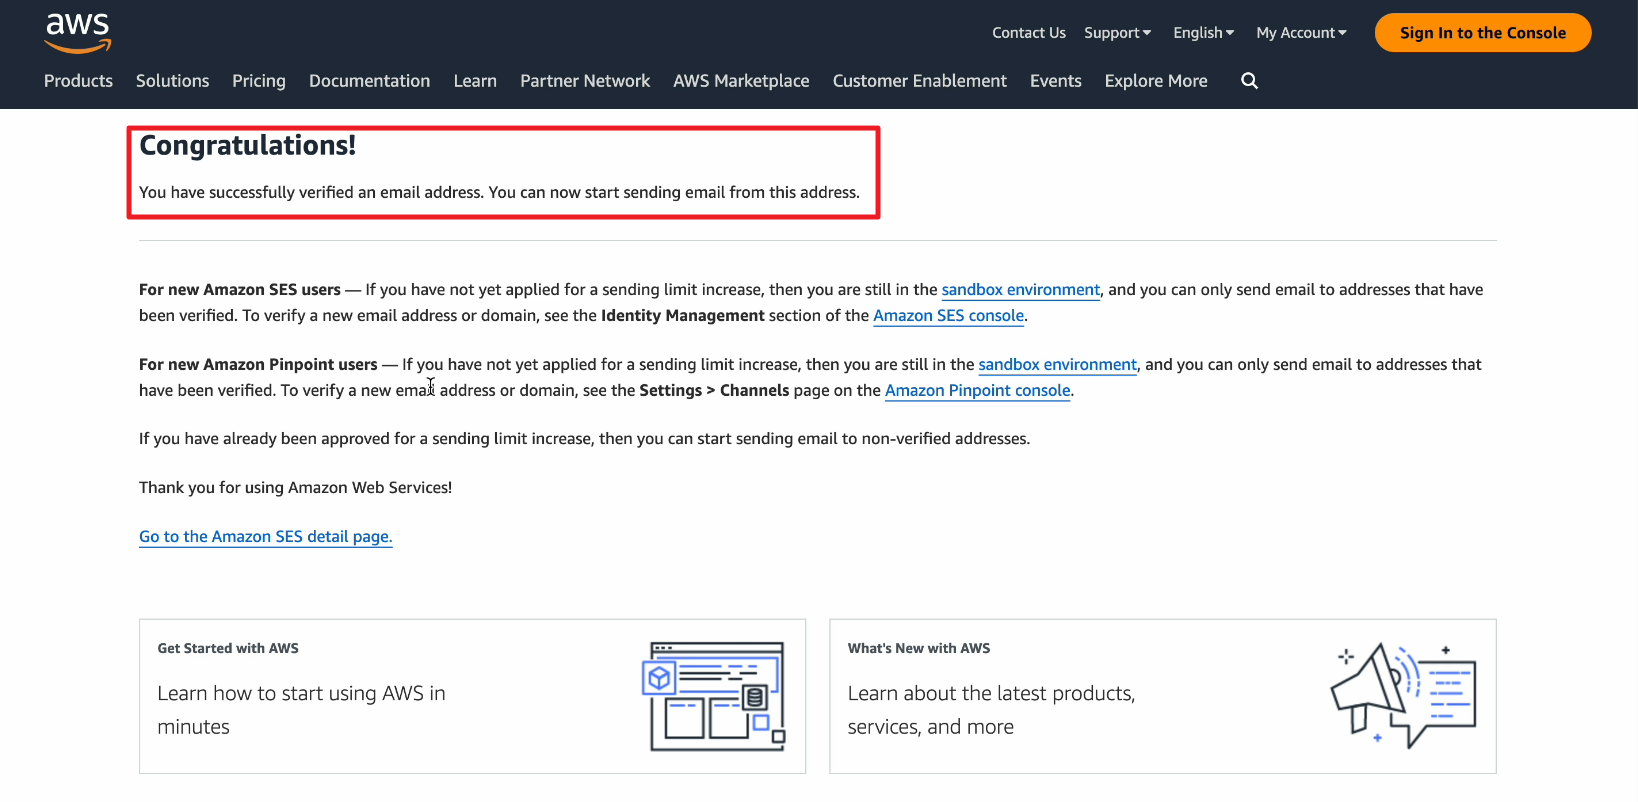 Amazon SES showing congratulations and notifying that email address has been verified